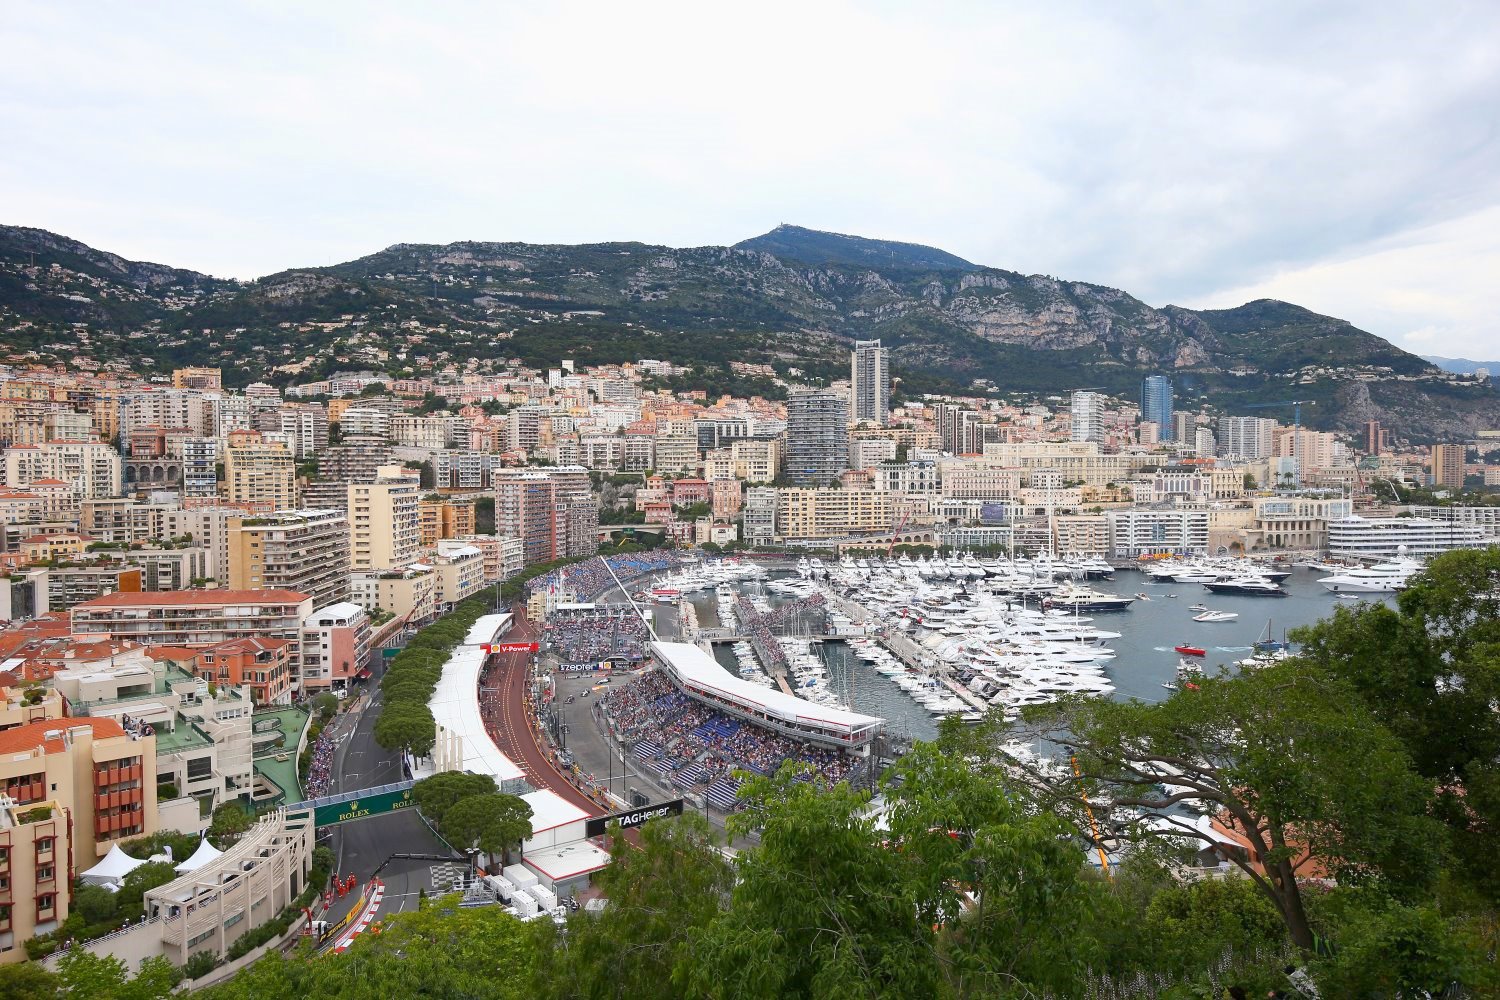 Space is already tight in Monaco